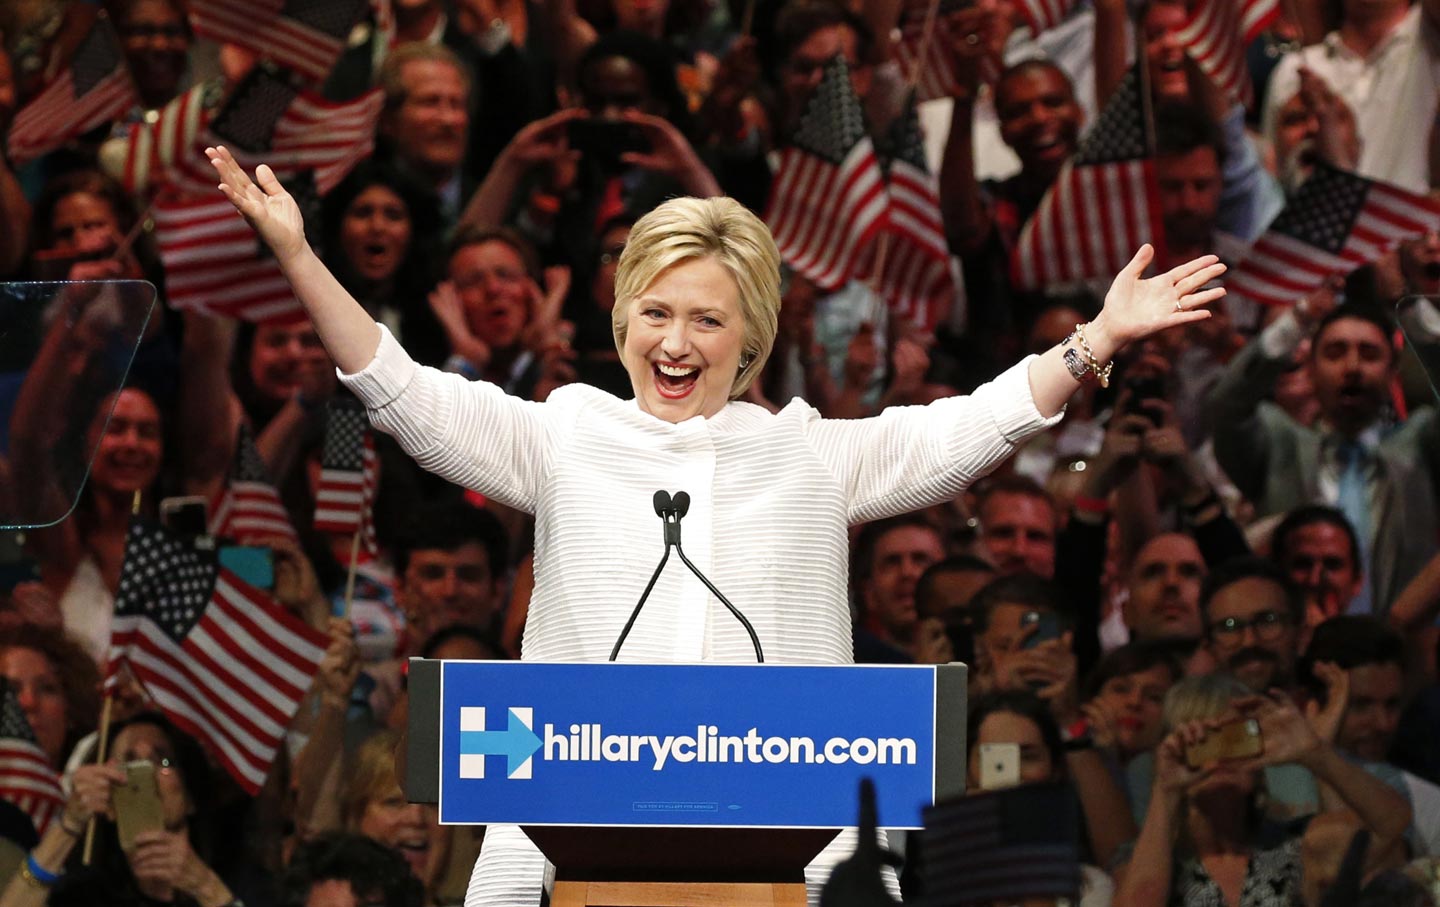 5 Things Hillary Can Do to Win Over Bernie’s Supporters